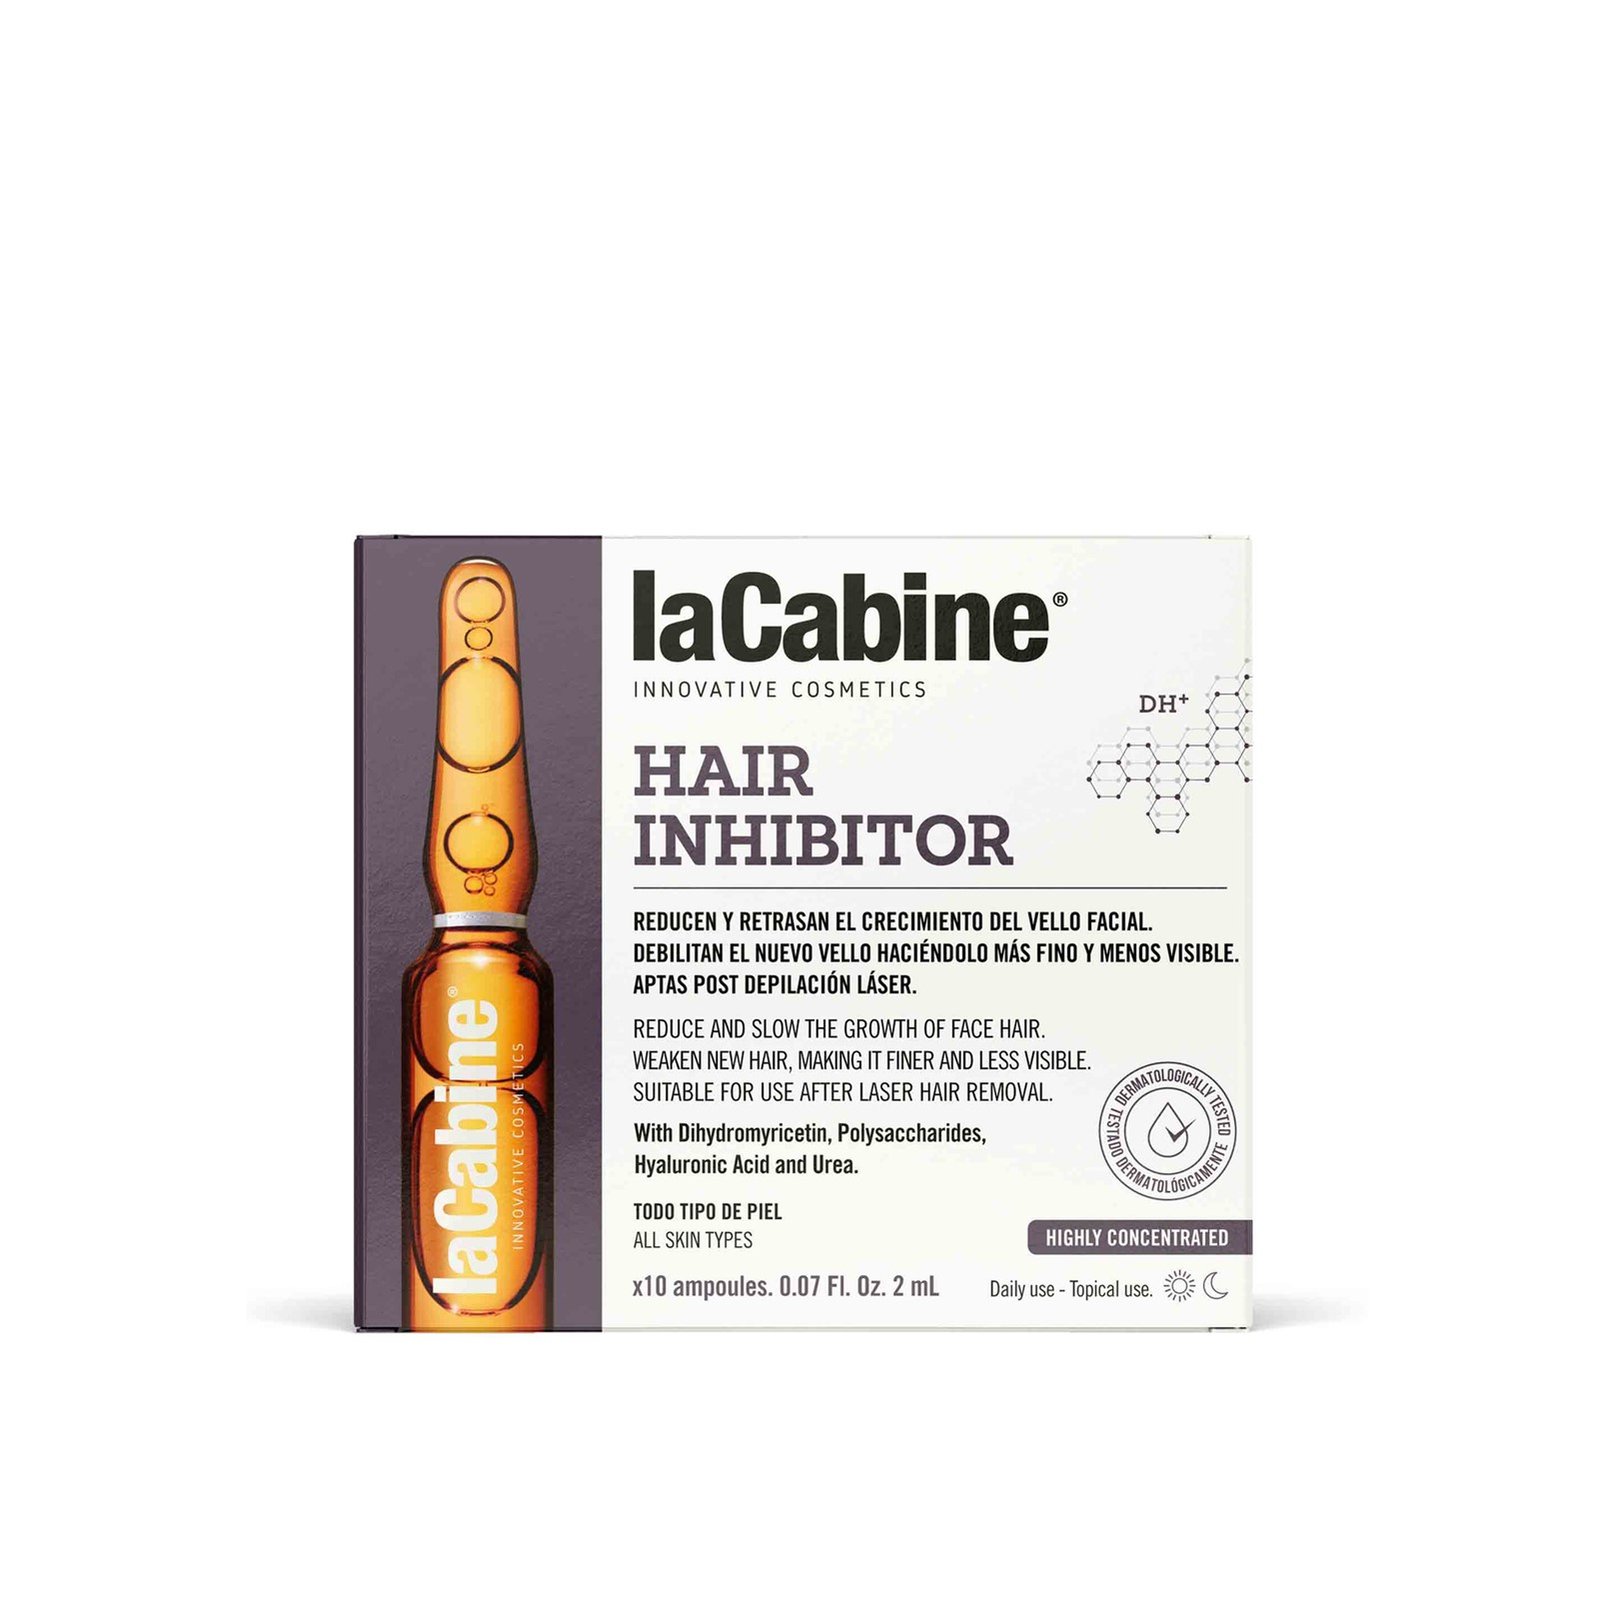 La Cabine Hair Inhibitor Concentrated Ampoules 10x2ml (10x0.07 fl oz)